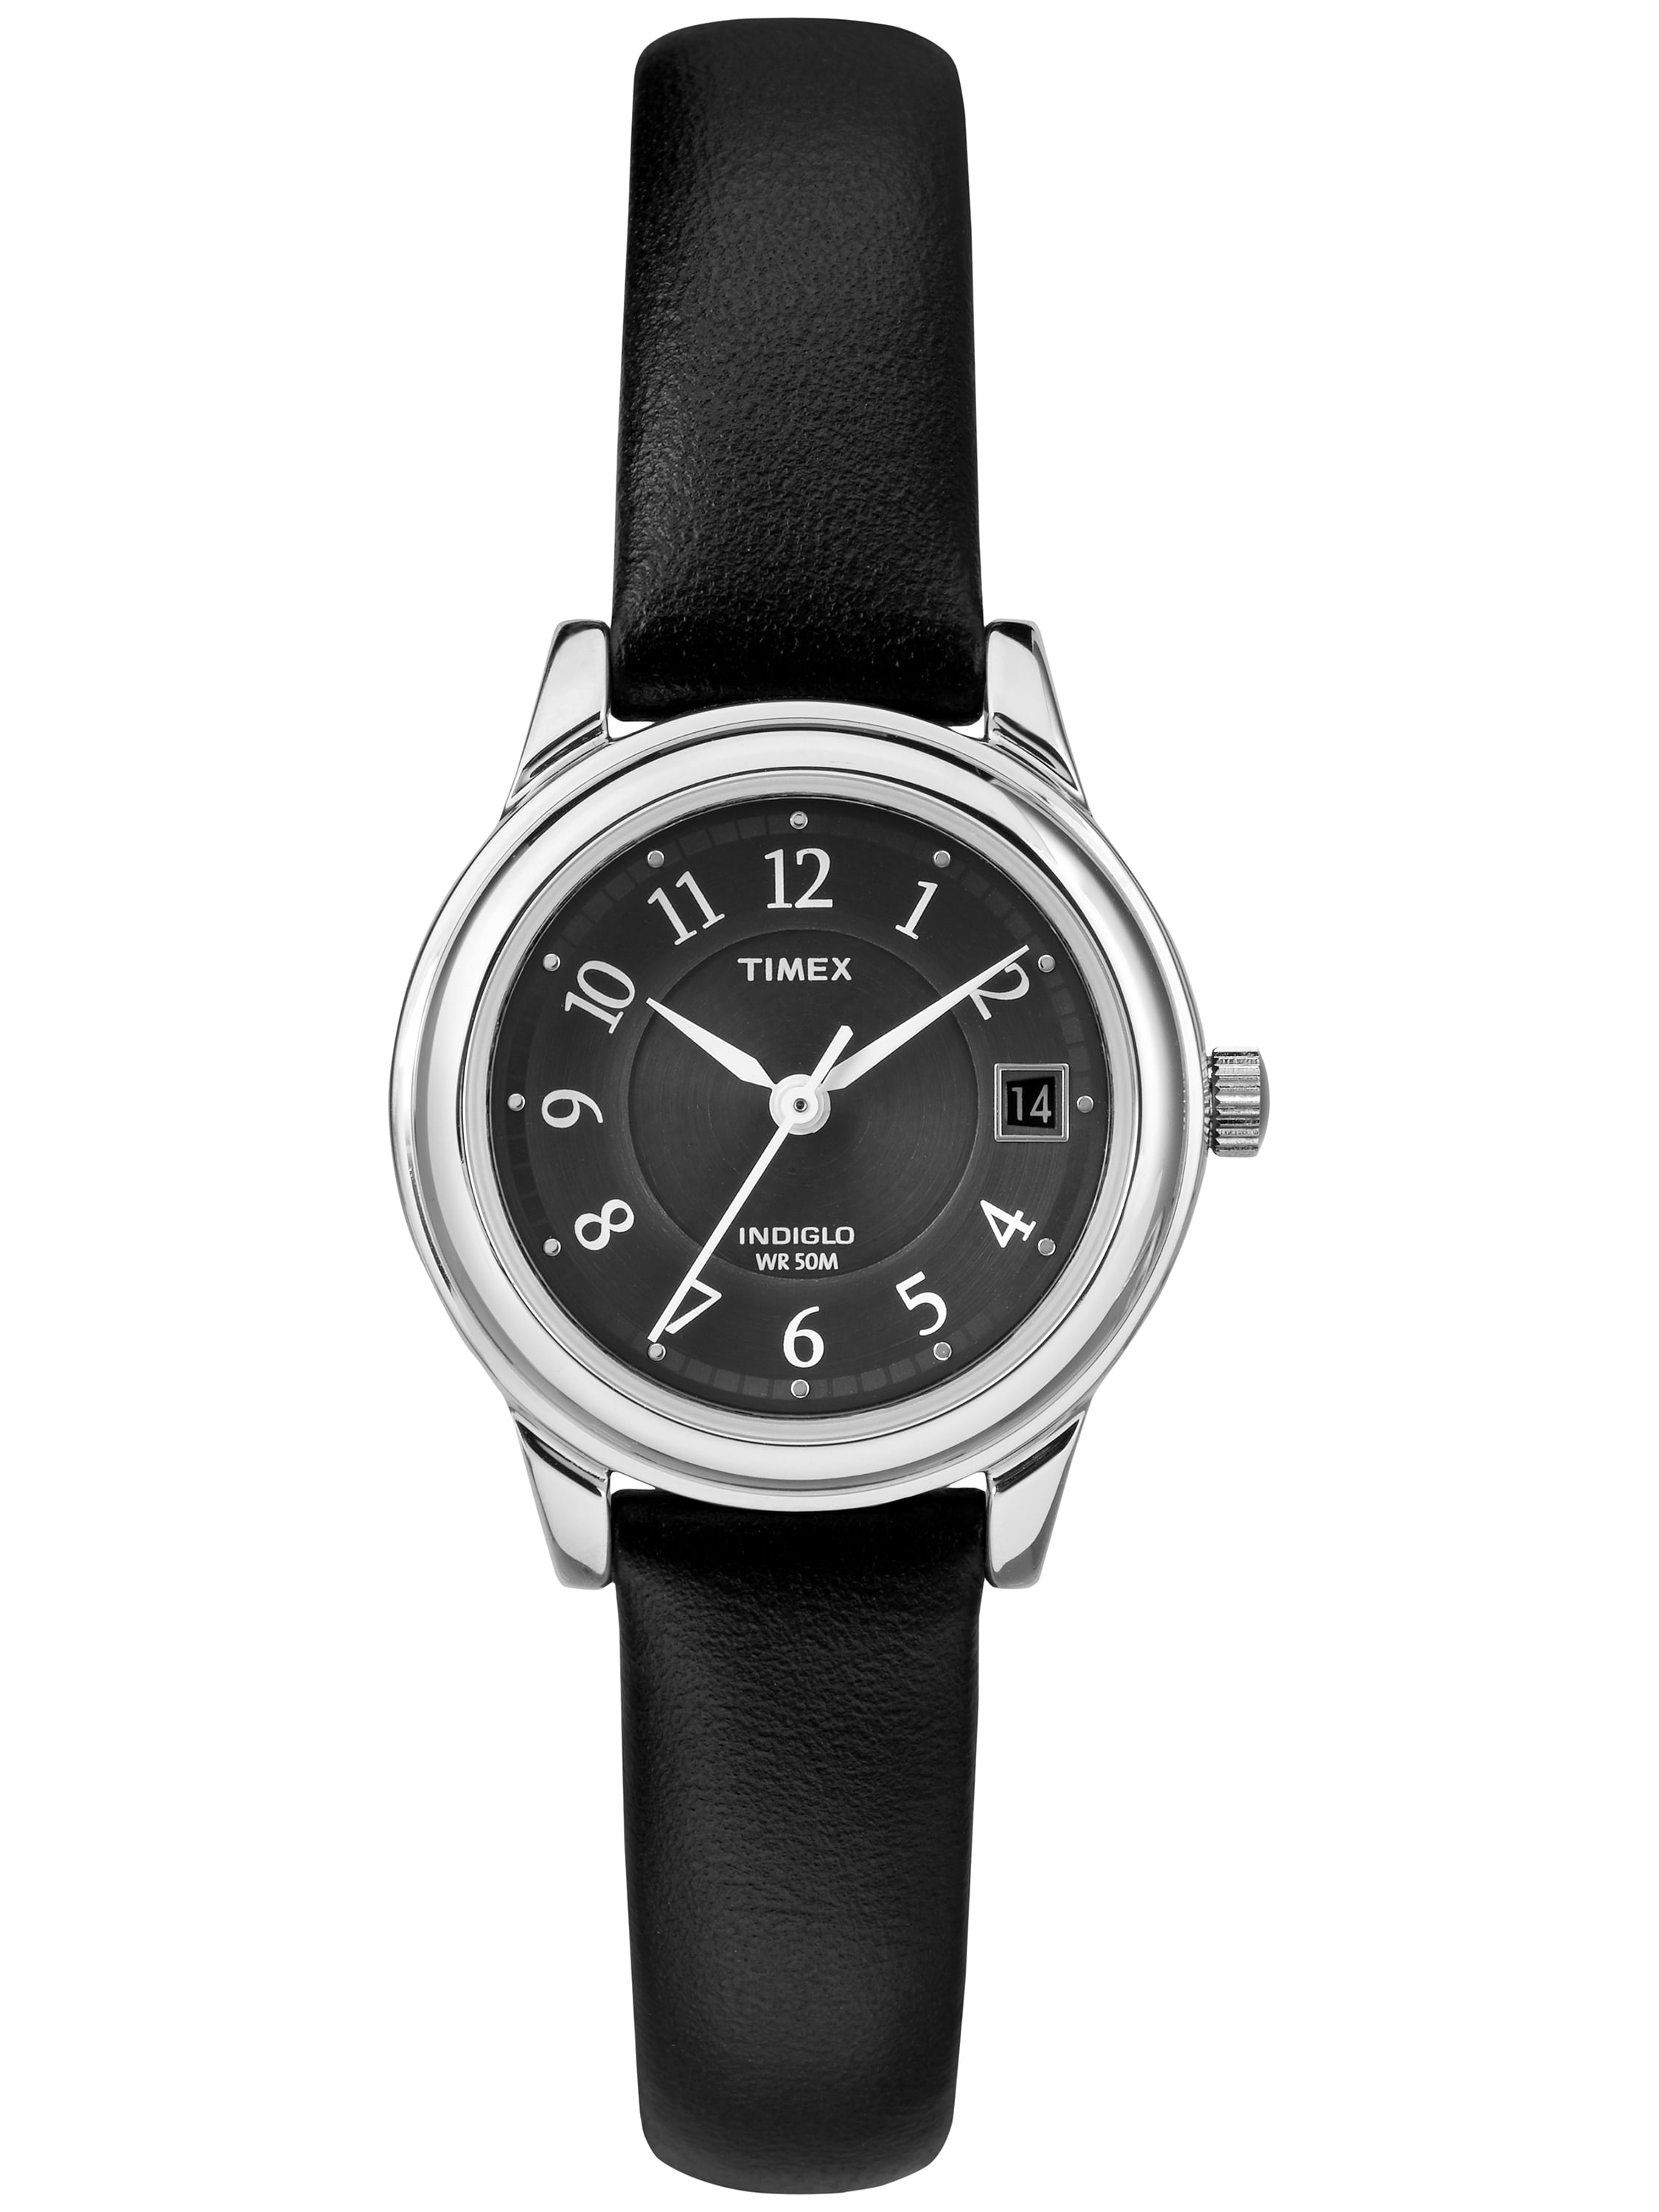 Timex Women's Porter Street 26mm Watch  Silver-Tone Case Black Dial with Black Leather Strap